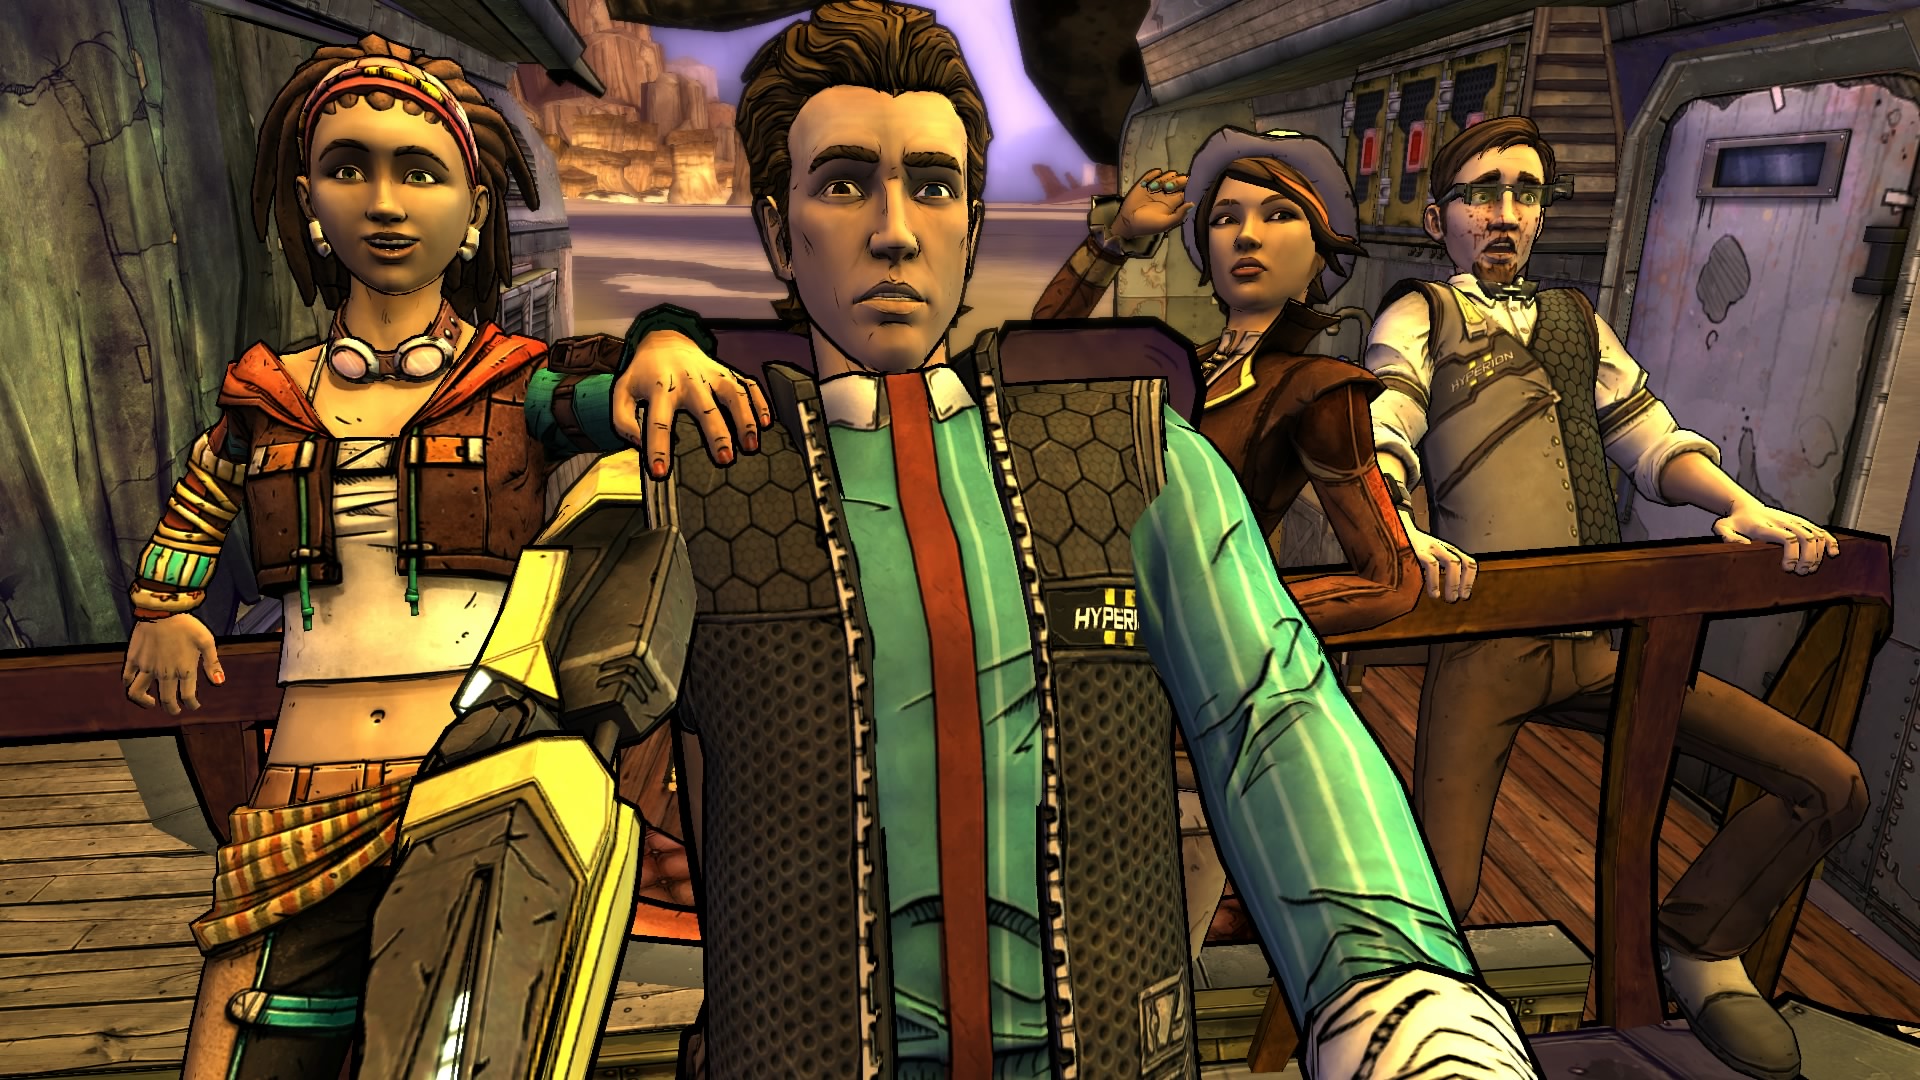 “Tales from the Borderlands” Final Episode Date Revealed - Also on 